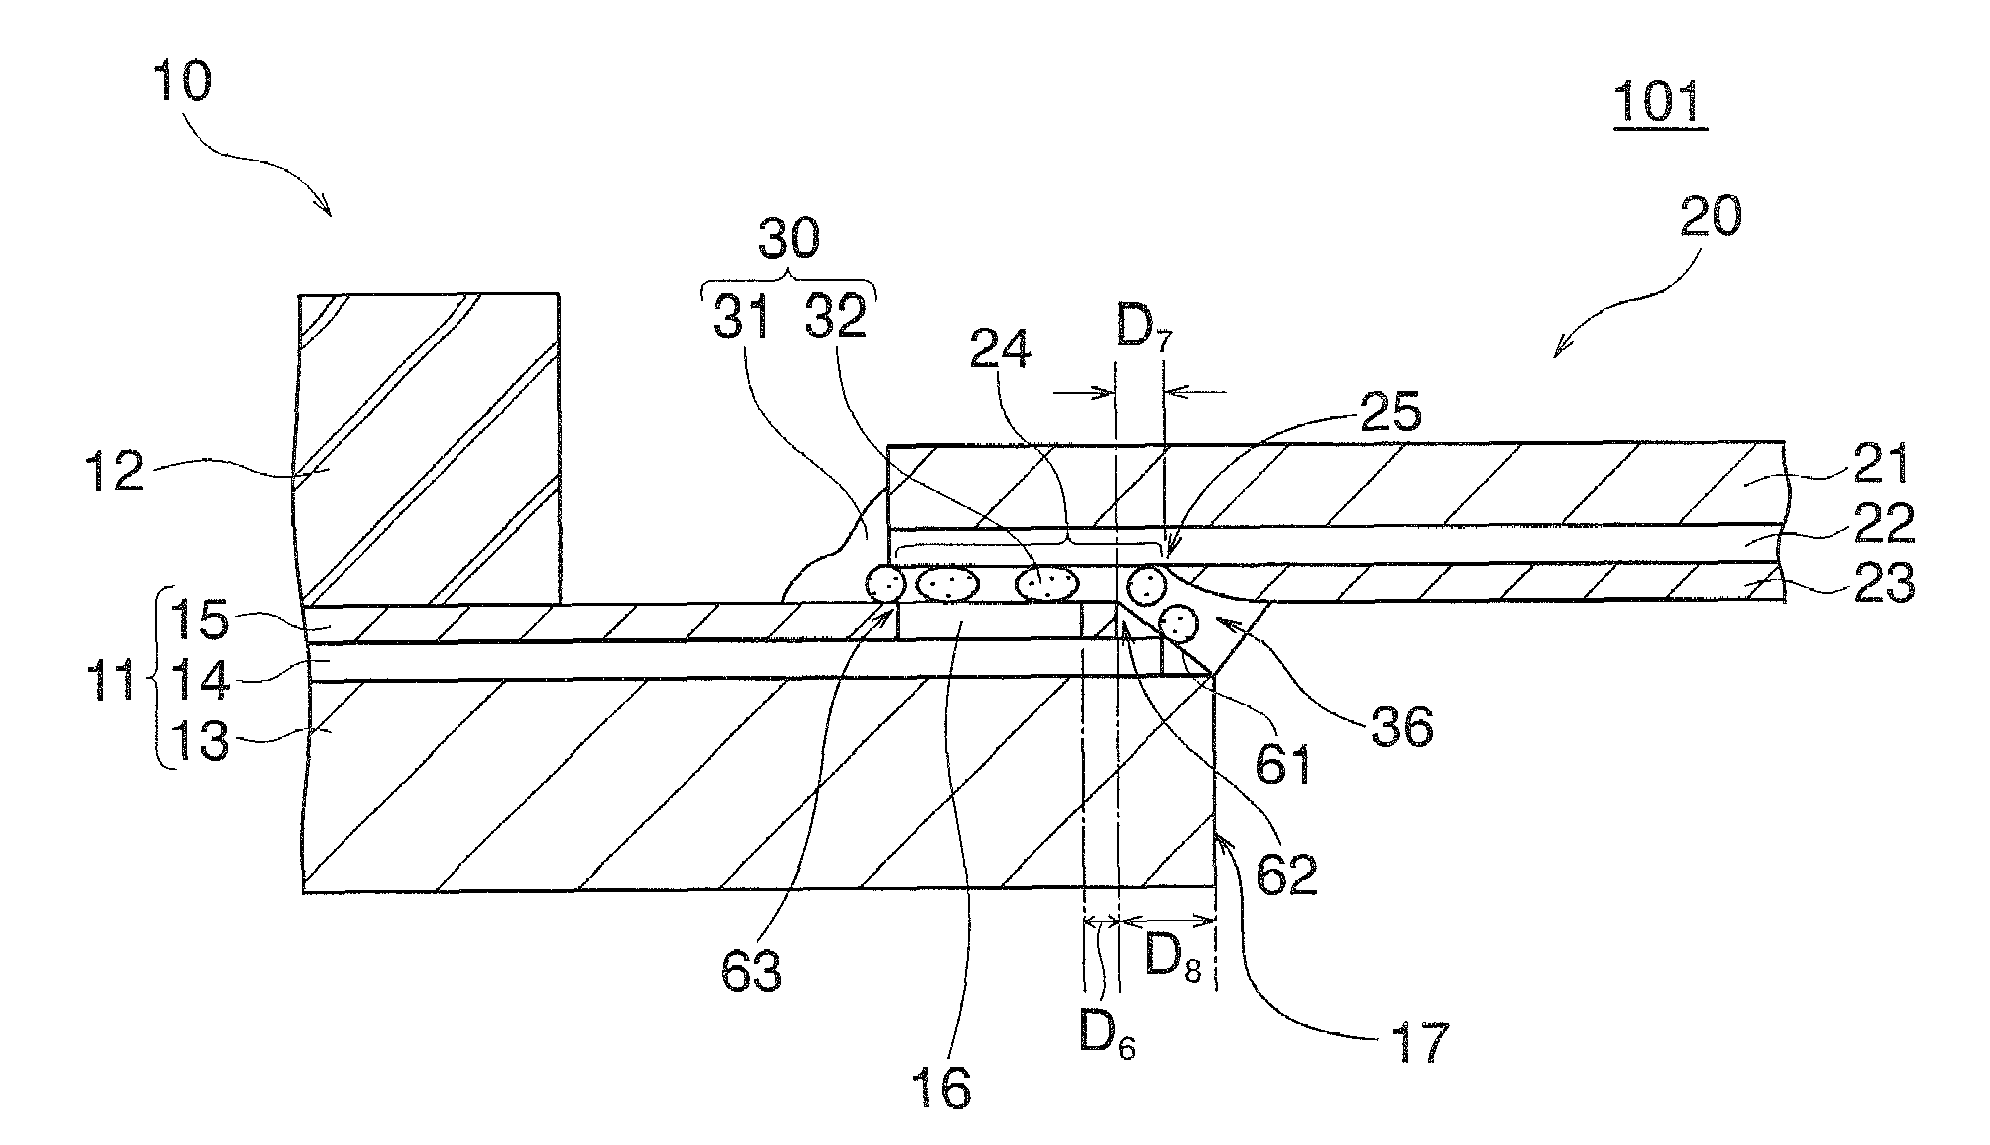 Display device having an anisotropic-conductive adhesive film